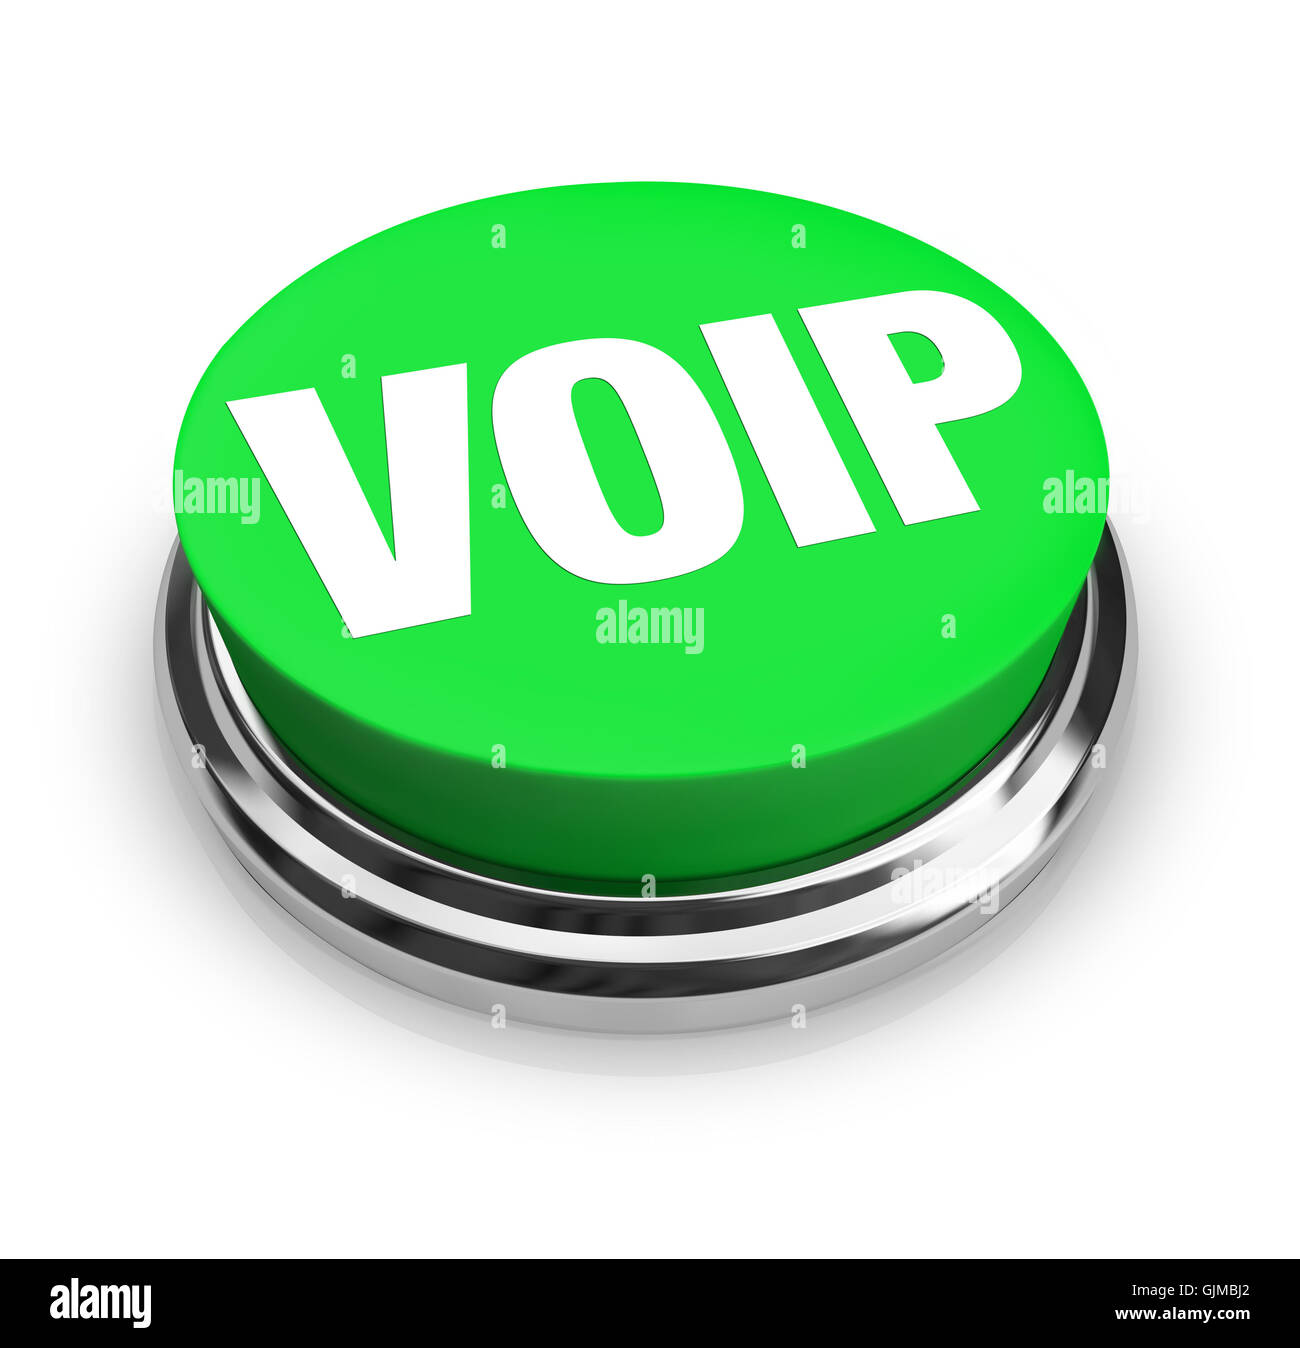 VOIP Word or Acronym on Green Round Button Stock Photo